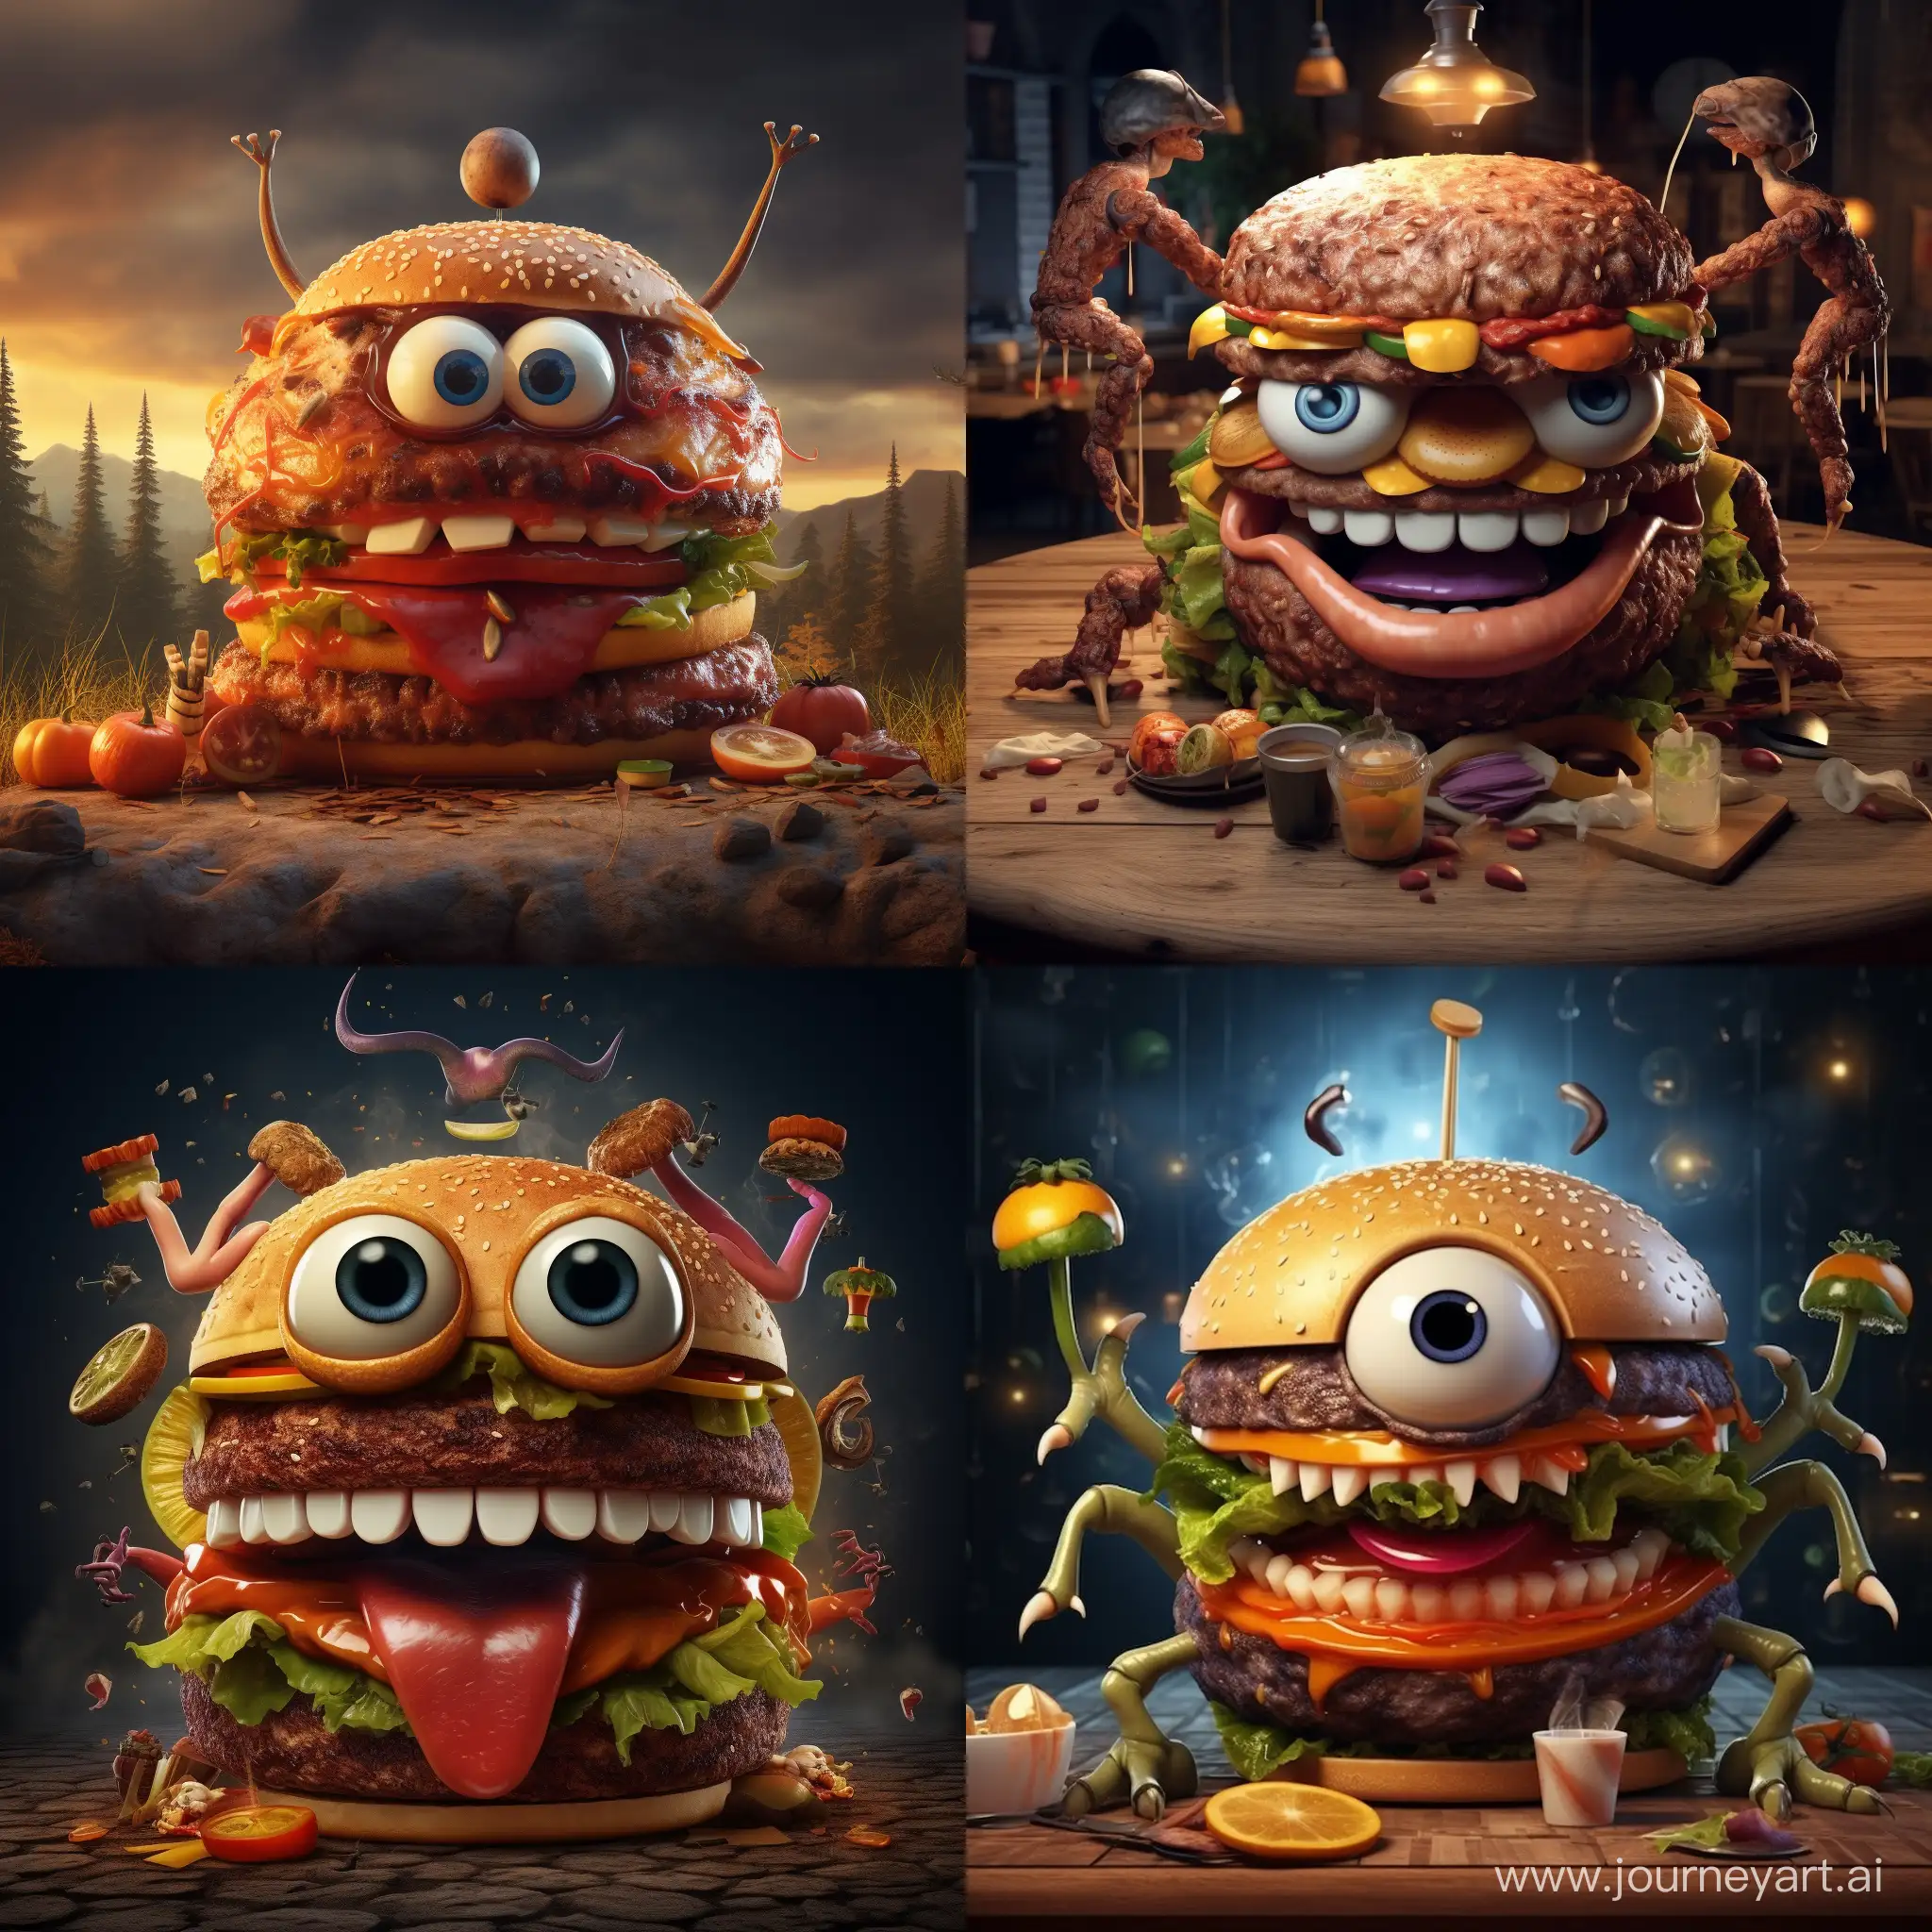 Playful-3D-Animation-Personified-Giant-Burger-with-Expressive-Eyes-and-Limbs